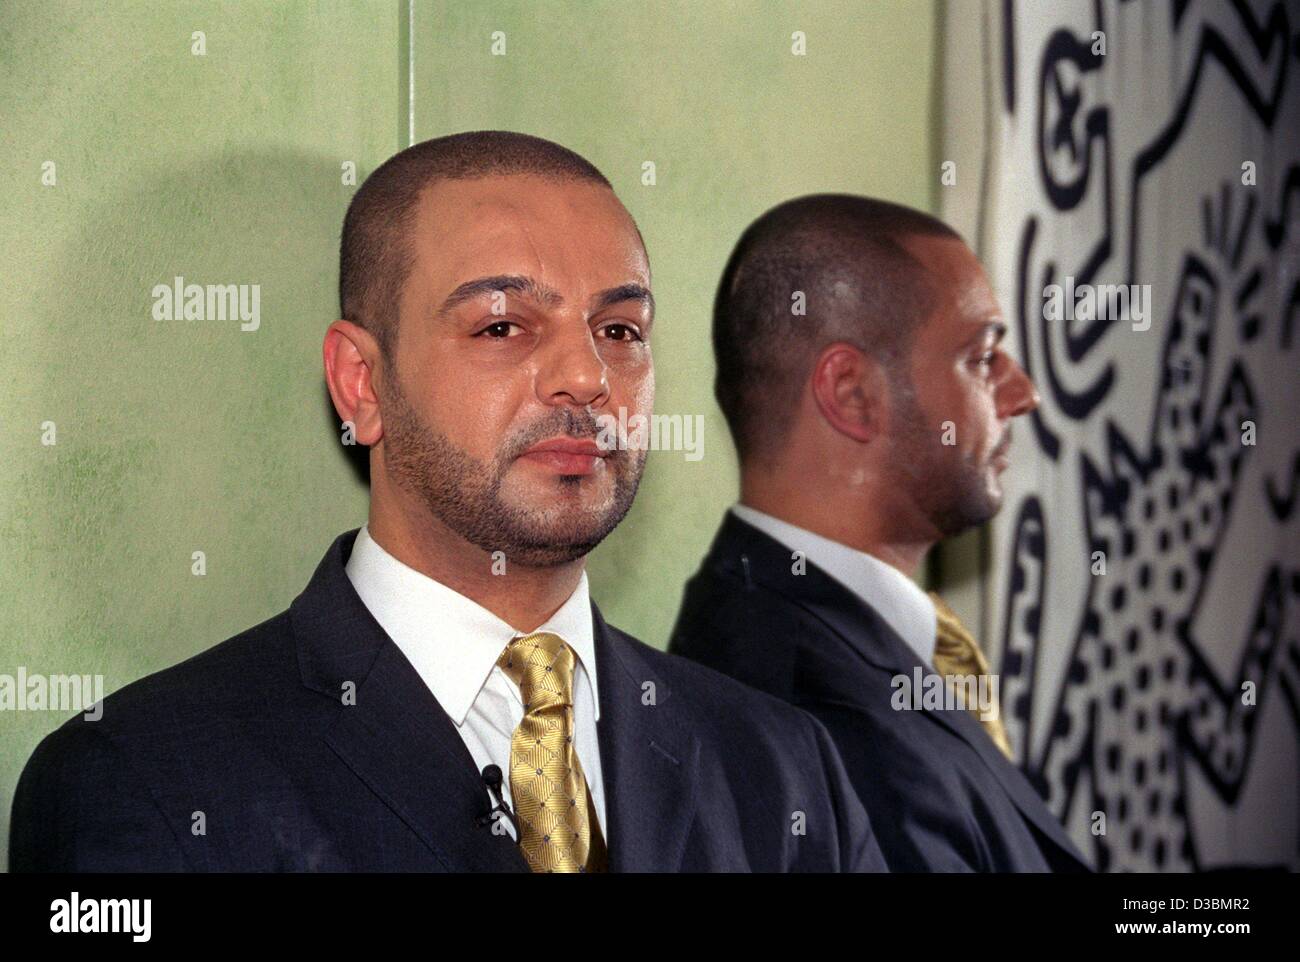 (dpa) - Iraqi author Latif Yahia pictured in Cologne, 11 February 2003. Together with author Karl Wendl he had published in 1994 the book 'I Was Saddam's Son'. In Iraq, Latif Yahia was forced with torture to act from 1987 to 1991 as 'Fidai' (body double, body guard and slave) of Udai Hussein, the el Stock Photo